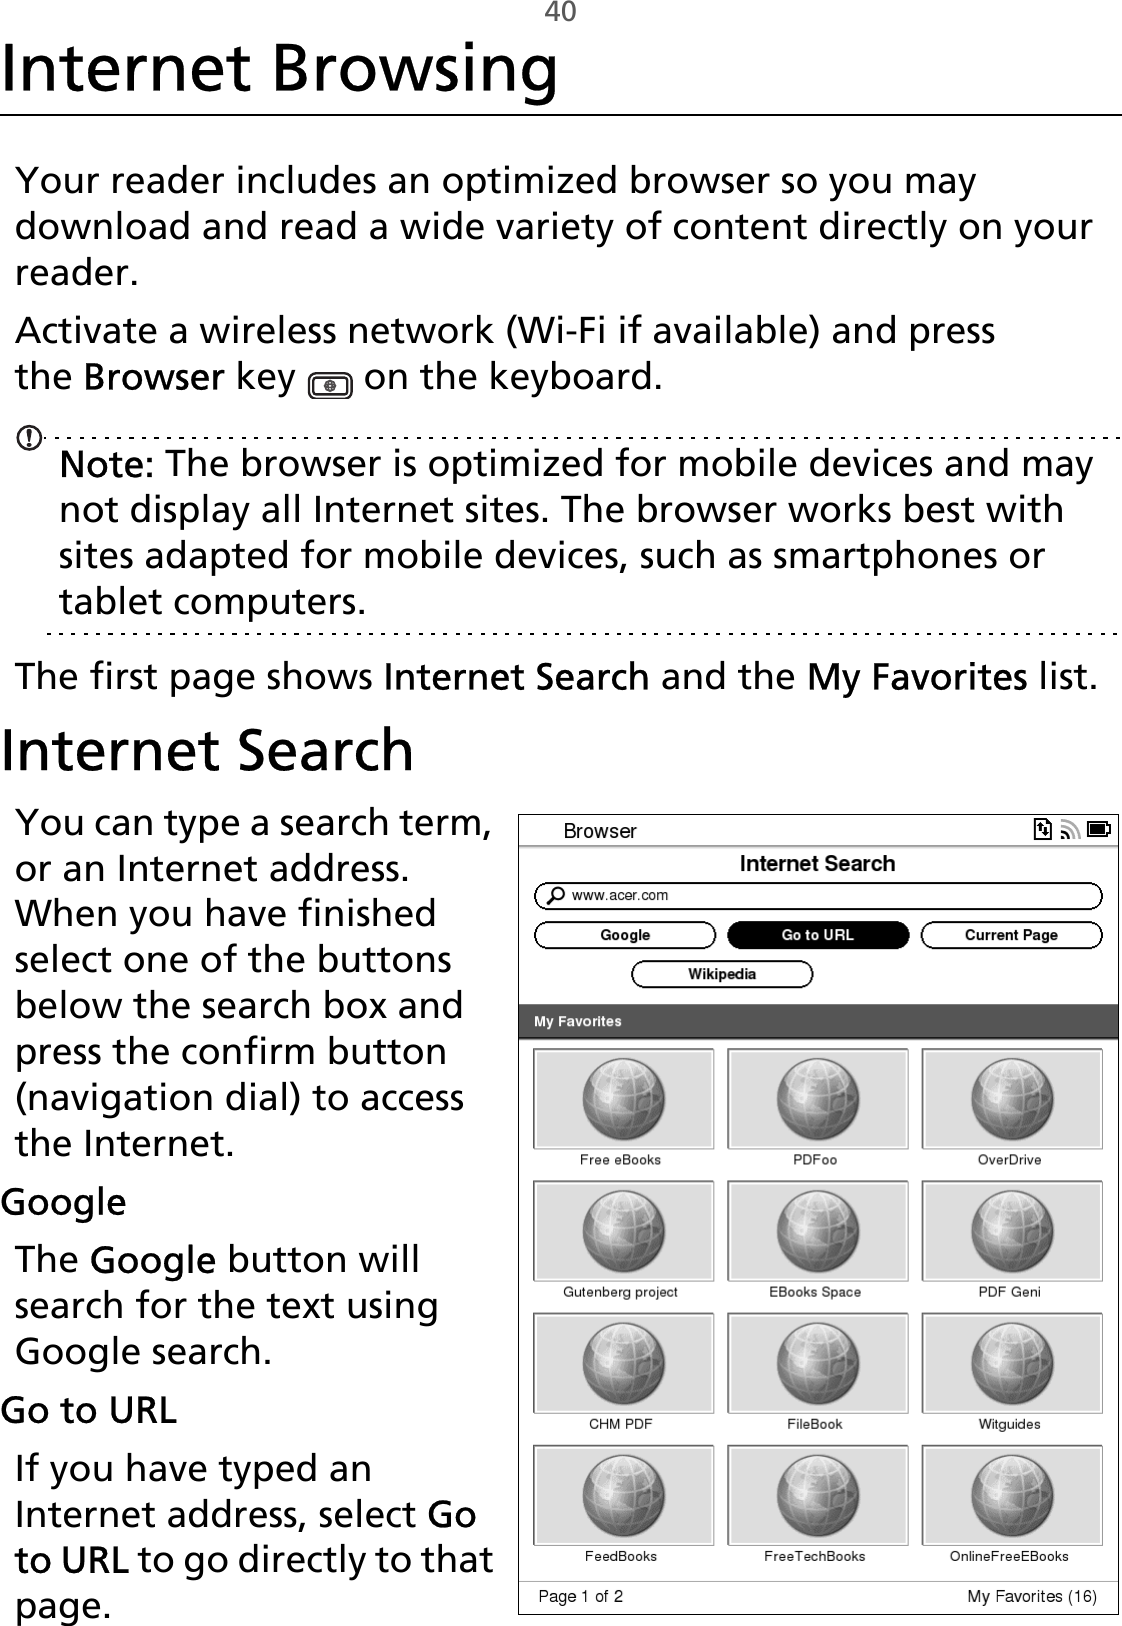 40Internet BrowsingYour reader includes an optimized browser so you may download and read a wide variety of content directly on your reader.Activate a wireless network (Wi-Fi if available) and press the Browser key   on the keyboard.Note: The browser is optimized for mobile devices and may not display all Internet sites. The browser works best with sites adapted for mobile devices, such as smartphones or tablet computers.The first page shows Internet Search and the My Favorites list.Internet SearchYou can type a search term, or an Internet address. When you have finished select one of the buttons below the search box and press the confirm button (navigation dial) to access the Internet.GoogleThe Google button will search for the text using Google search.Go to URLIf you have typed an Internet address, select Go to URL to go directly to that page.